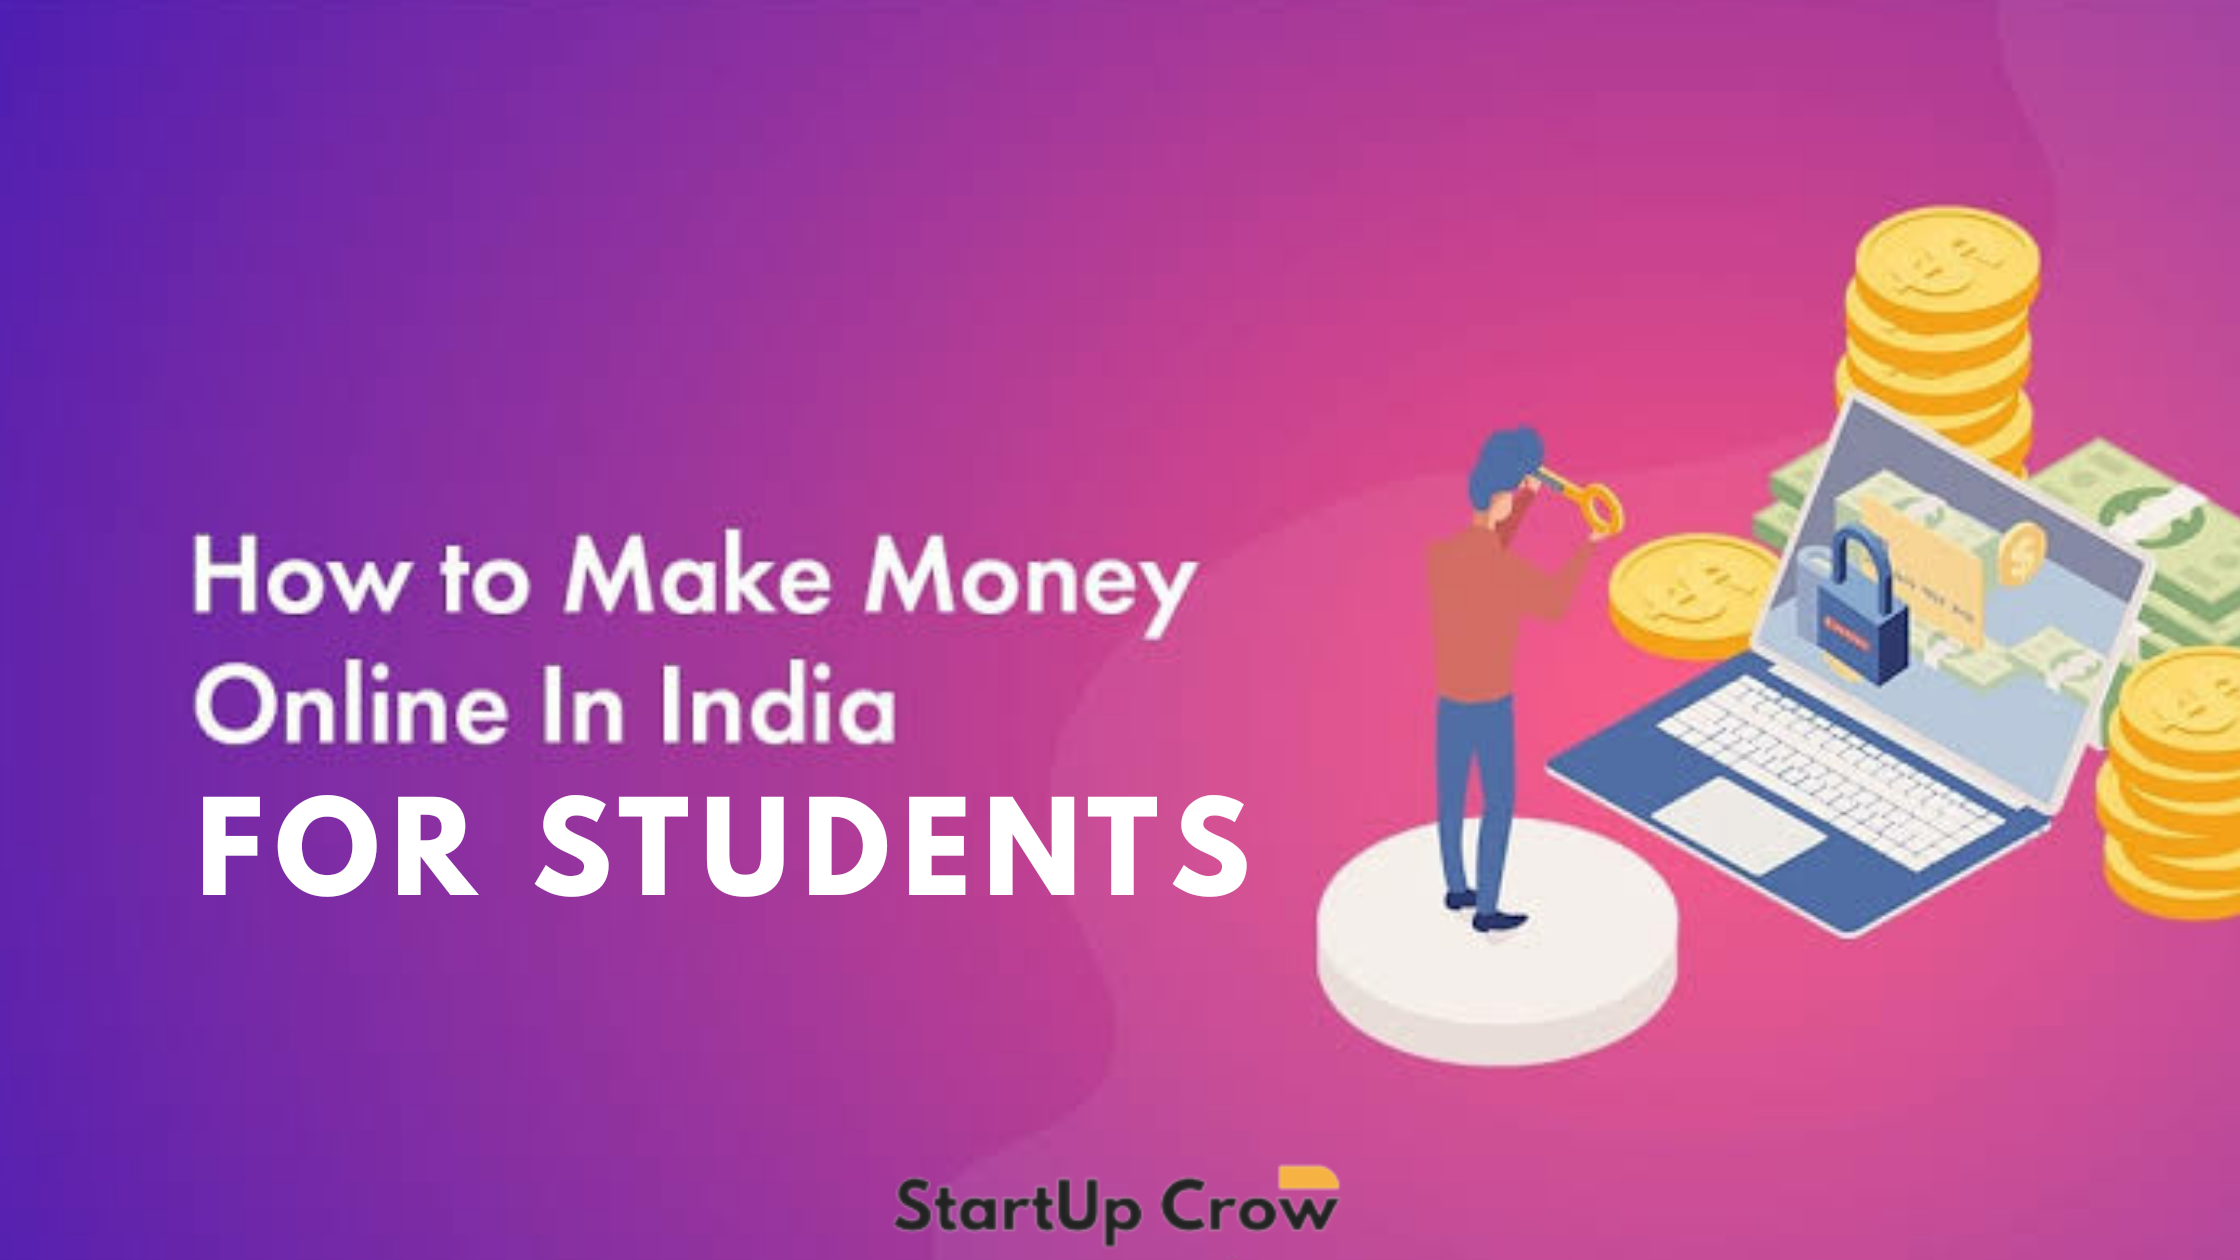 Make money online in India for Students